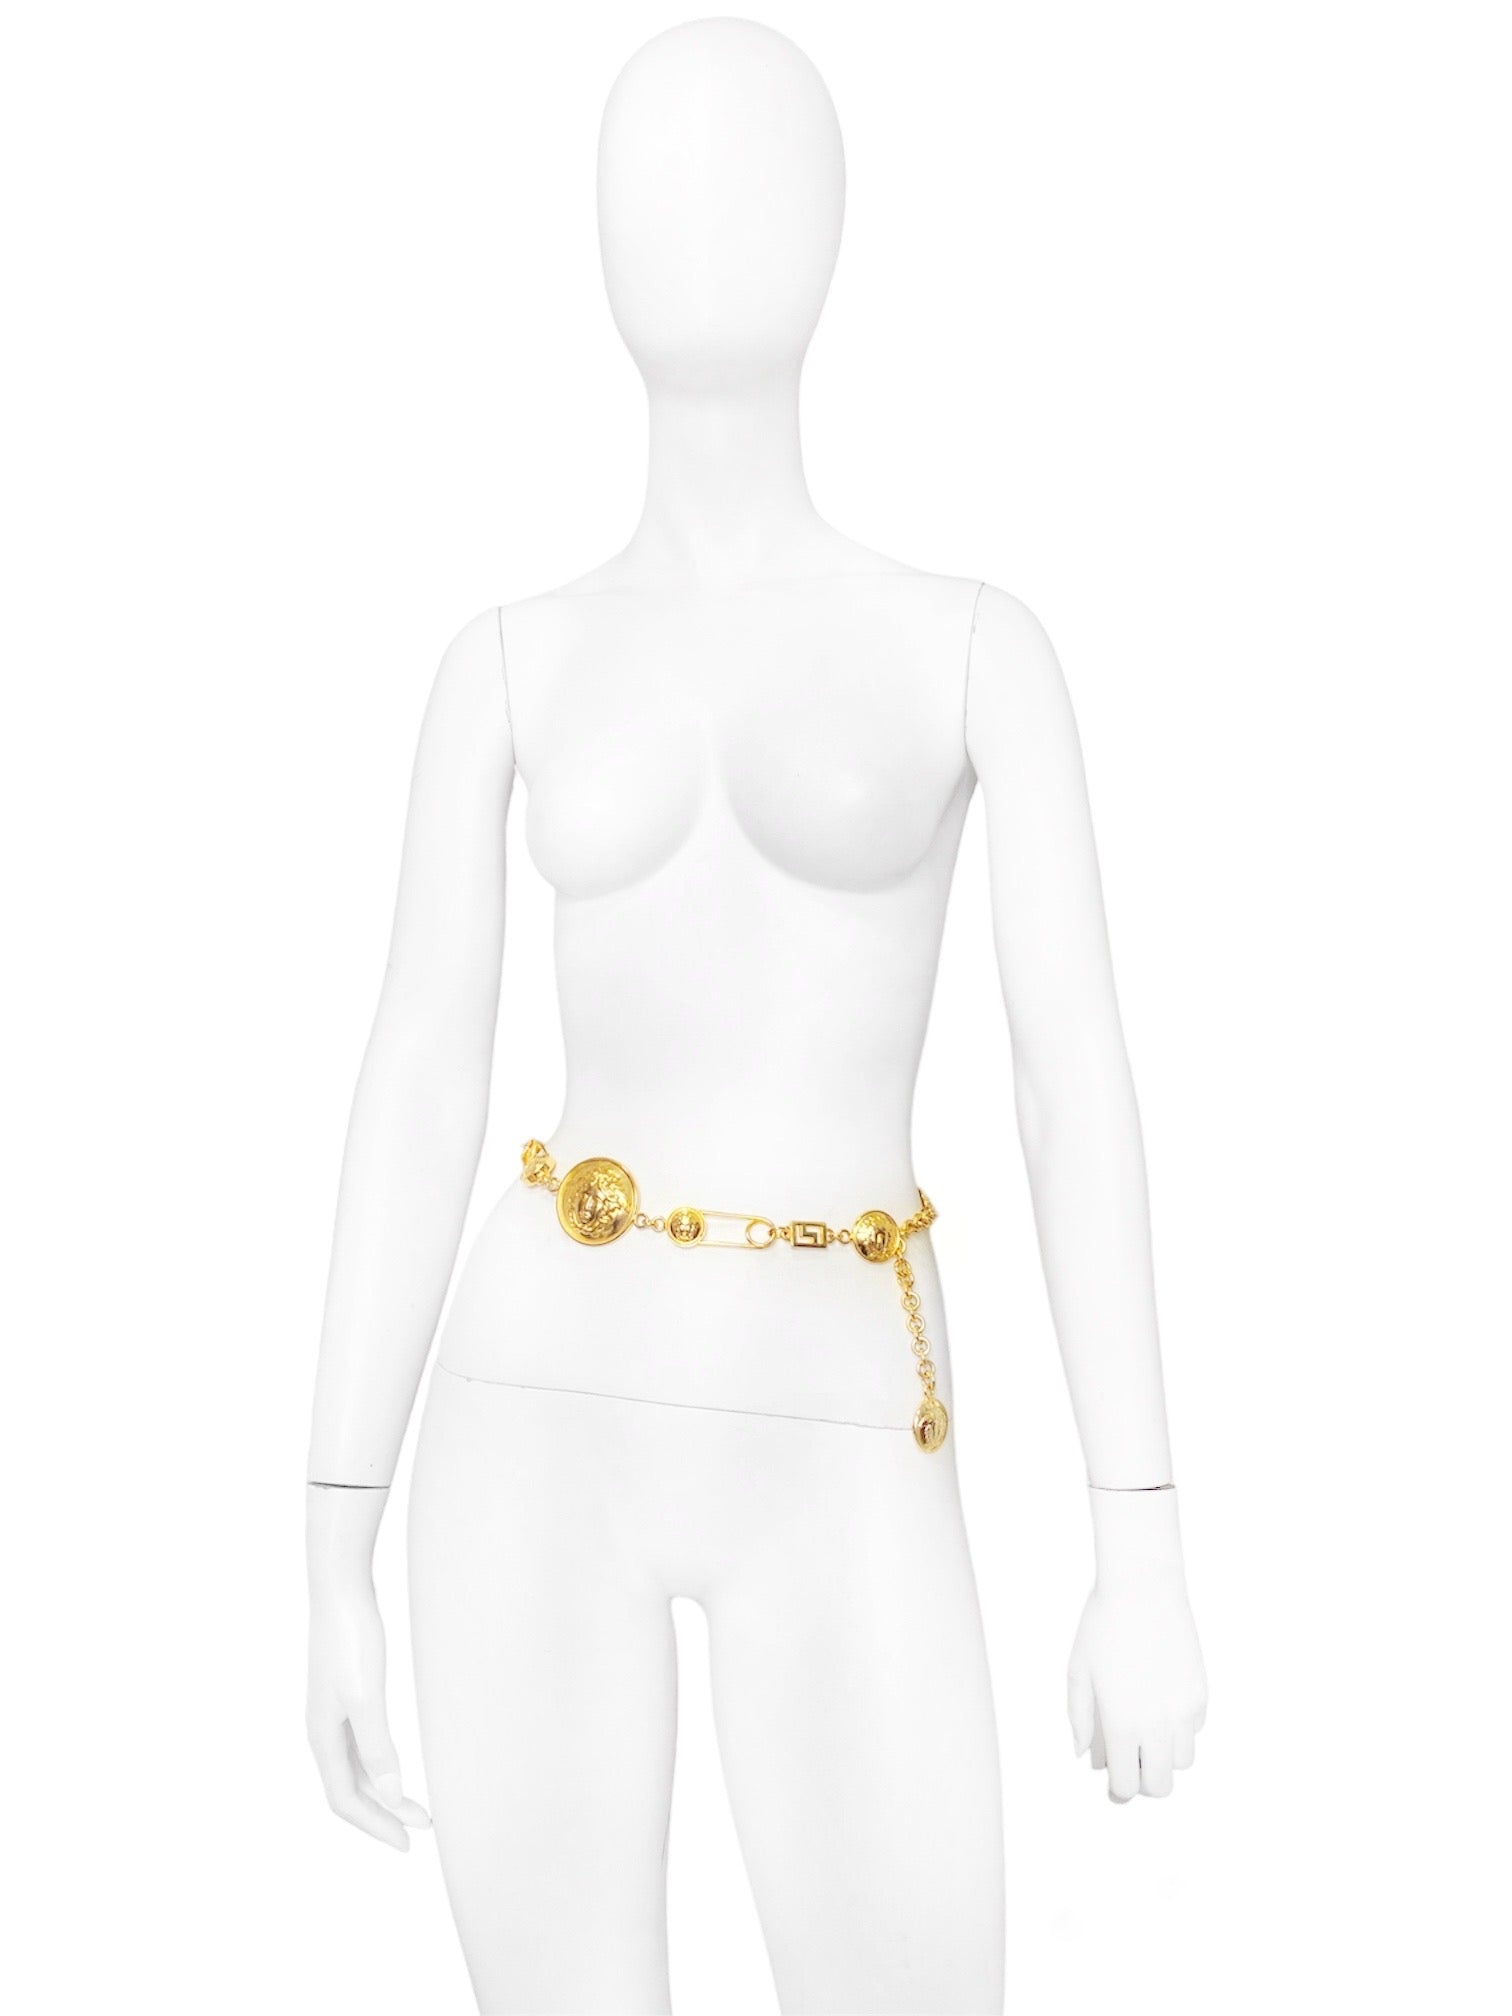 Gianni Versace Iconic Spring 1994 Gold Safety Pin Chain Belt - 8